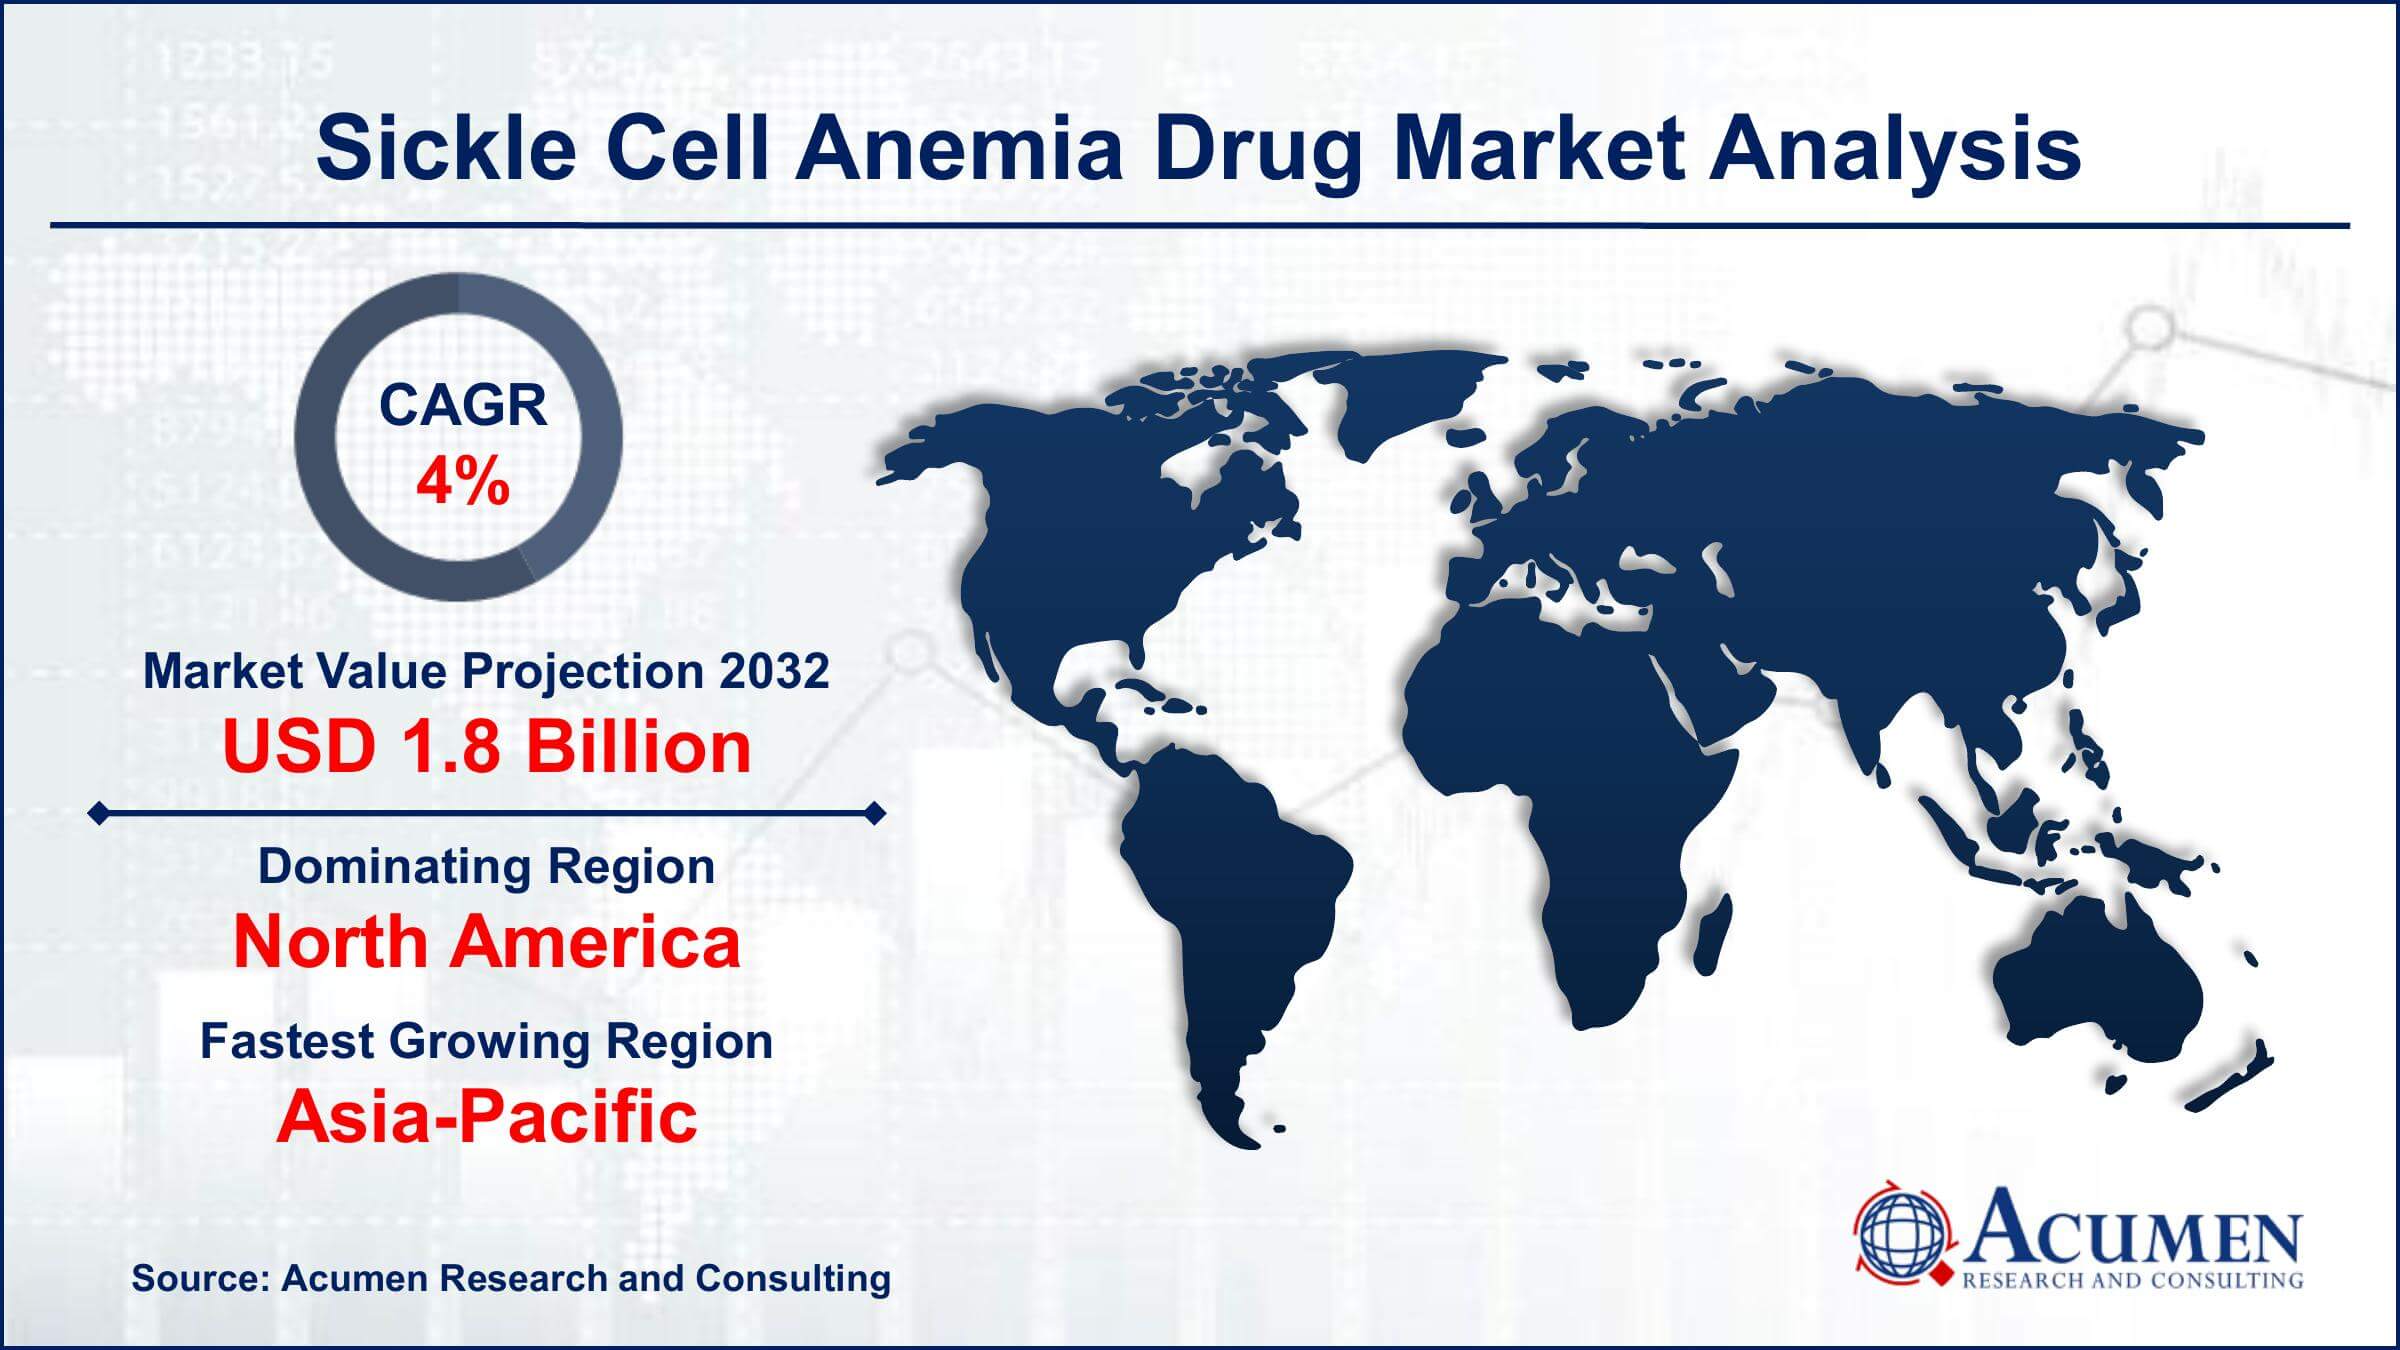 Global Sickle Cell Anemia Drug Market Trends